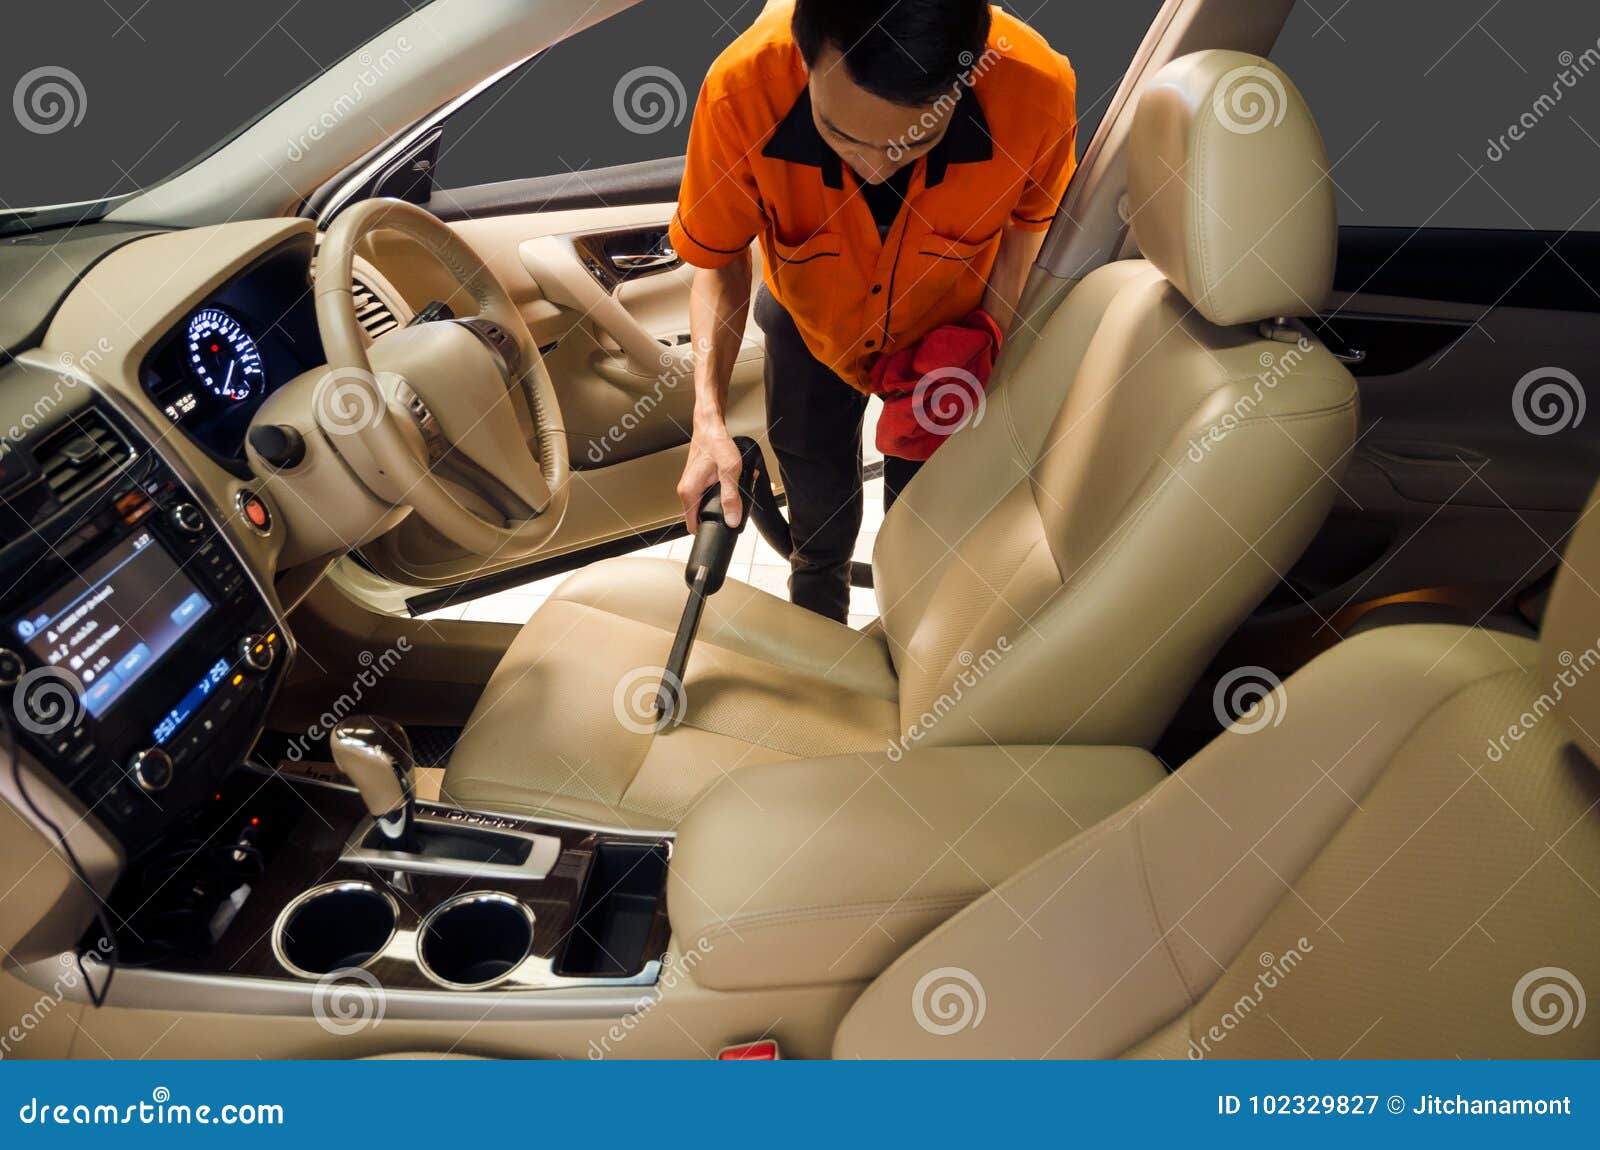 Cleaning Of Interior Of The Car With Vacuum Cleaner Stock